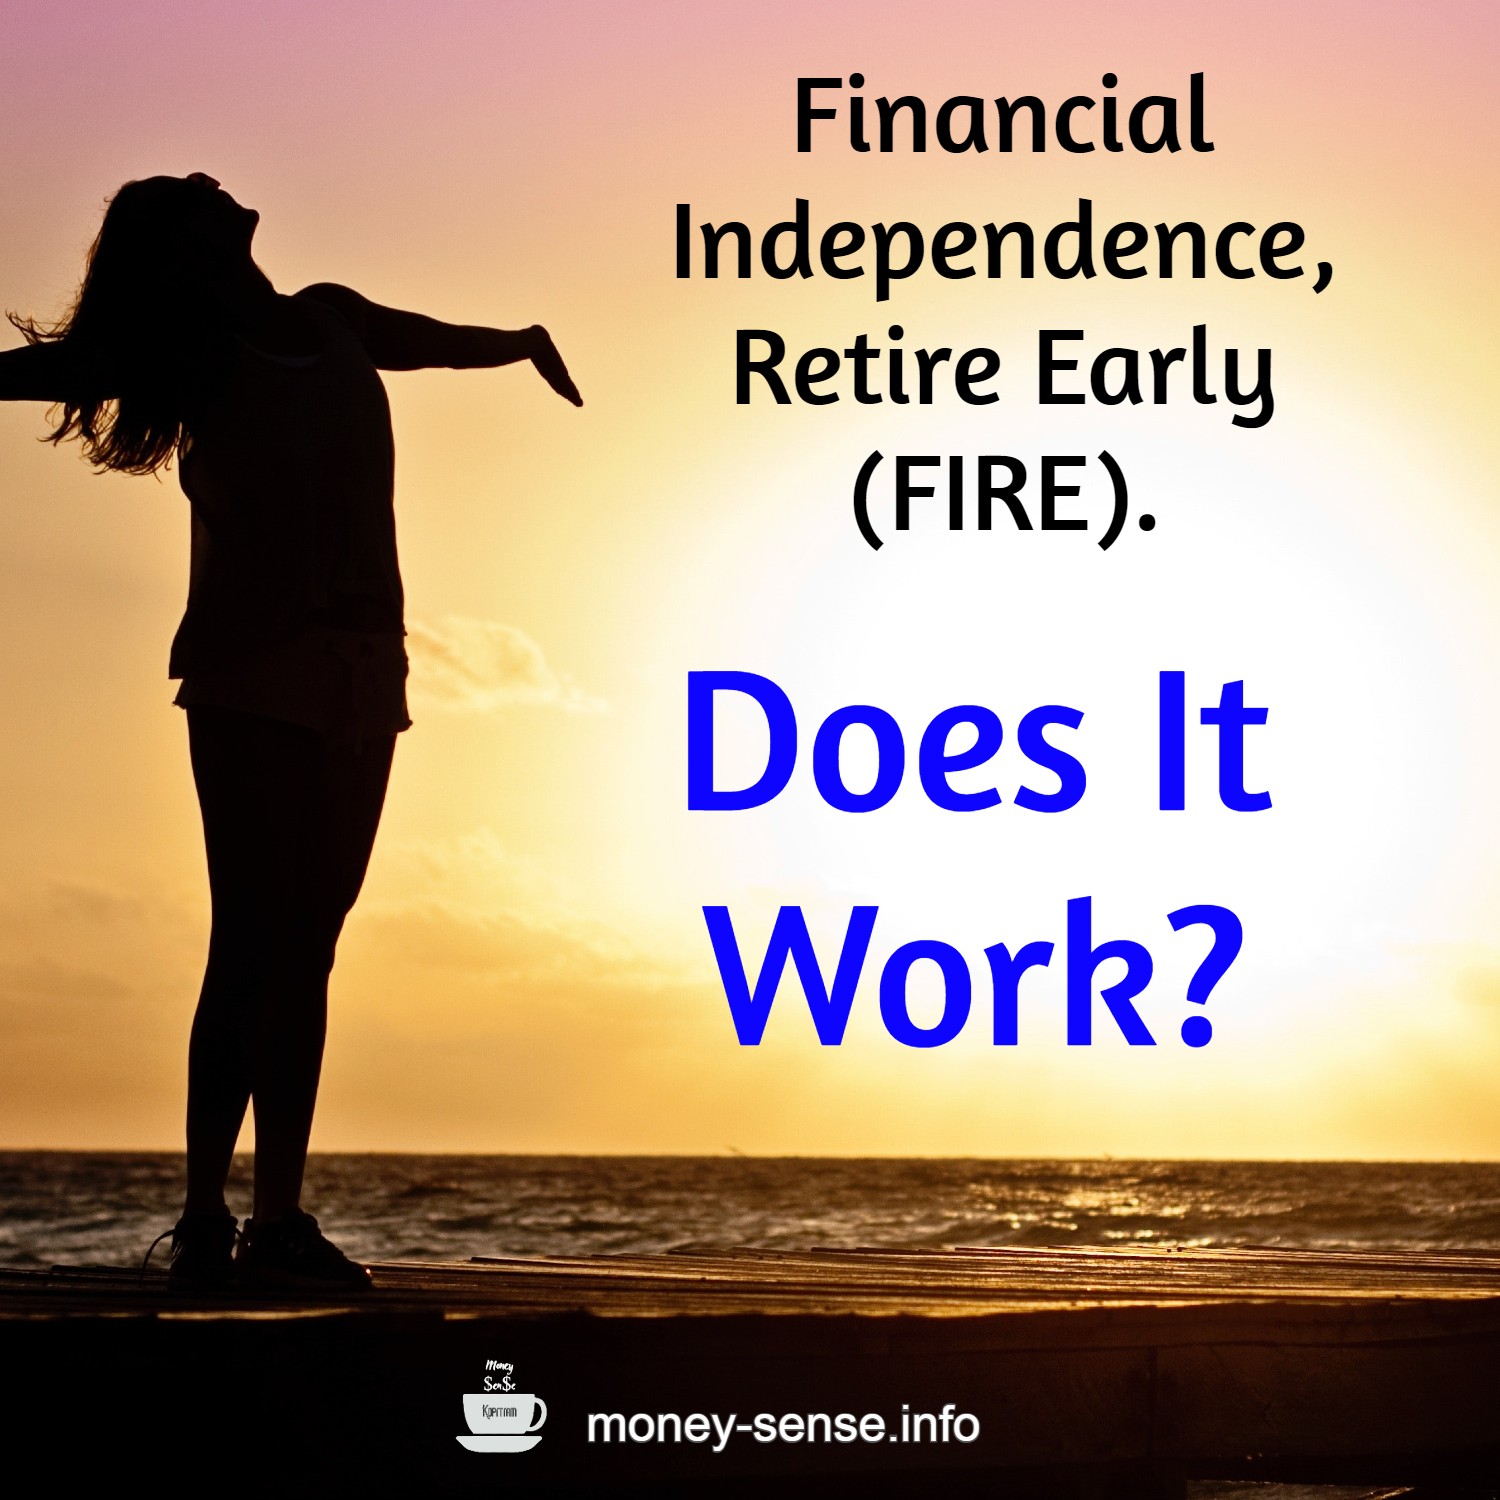 Financial Independence, Retire Early (FIRE) – Does It Work?